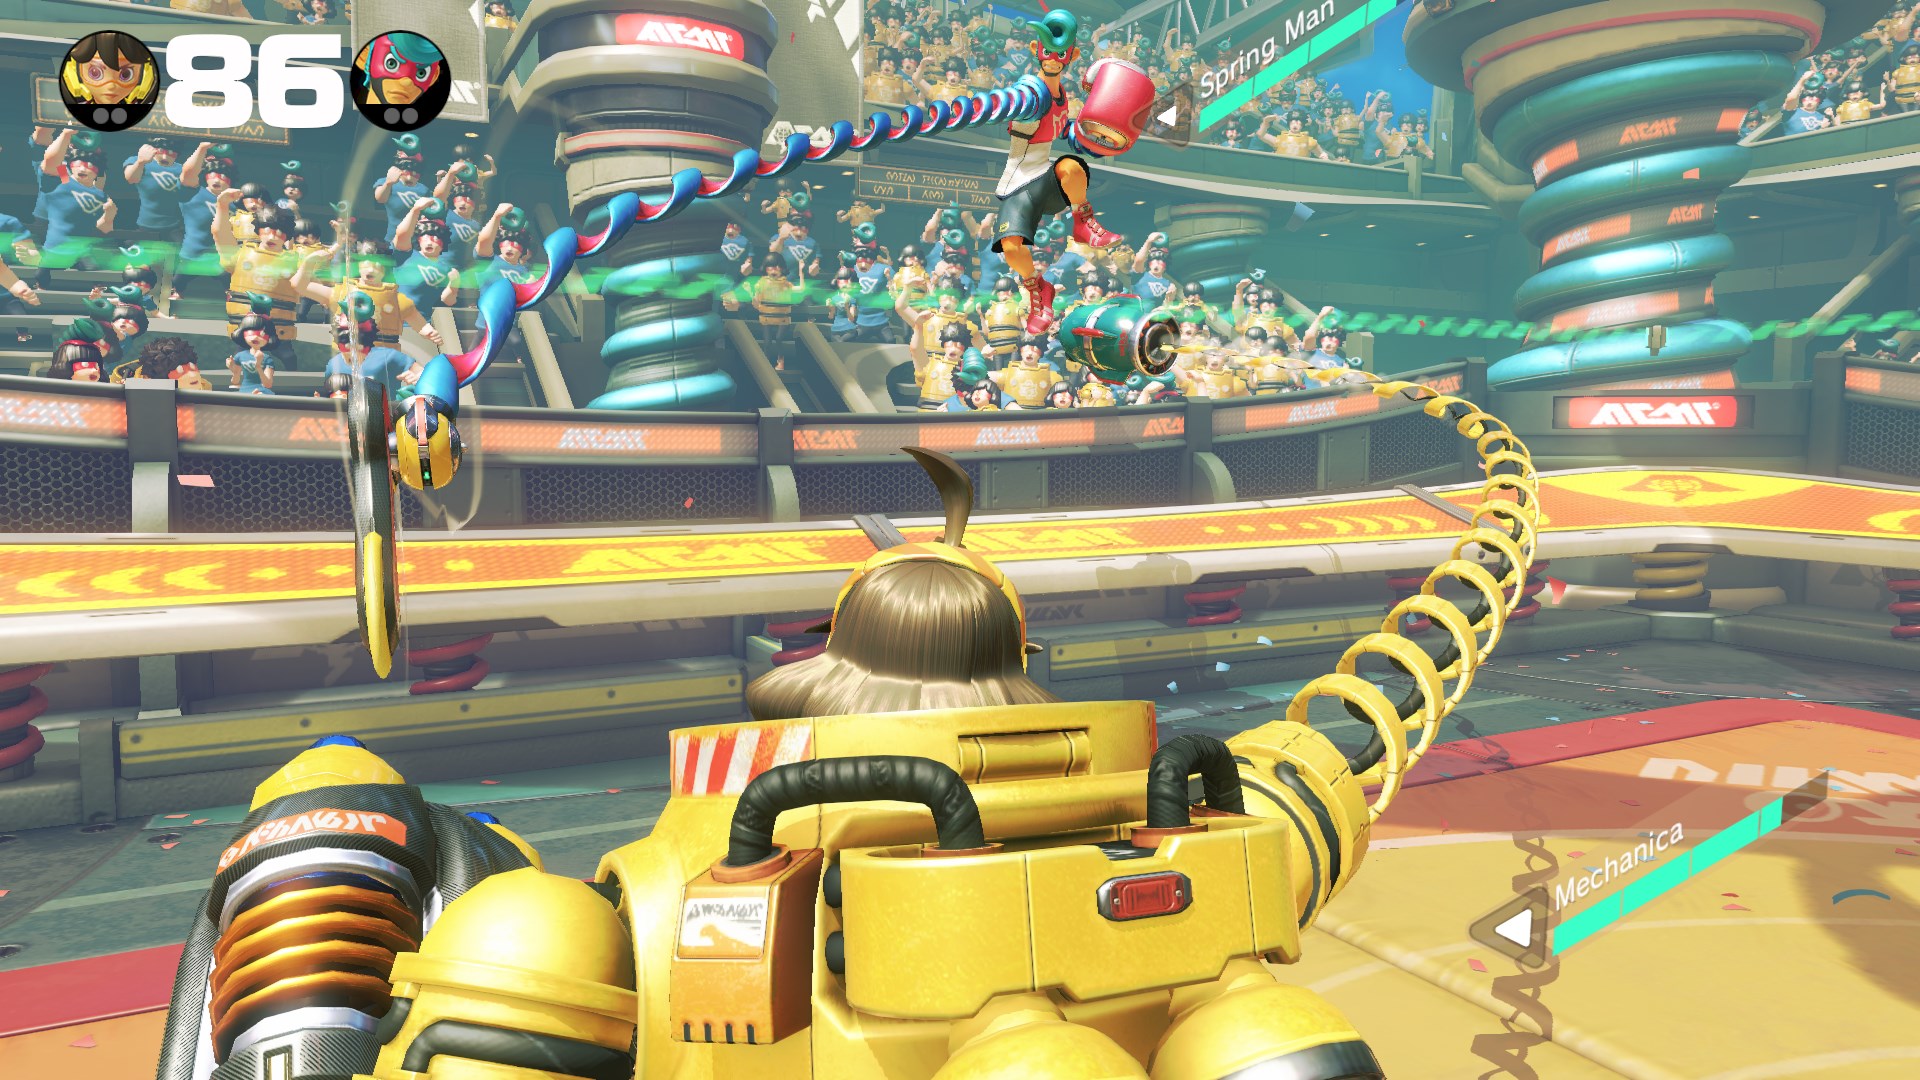 ARMS Global Testpunch, ARMS global test, Arms beta